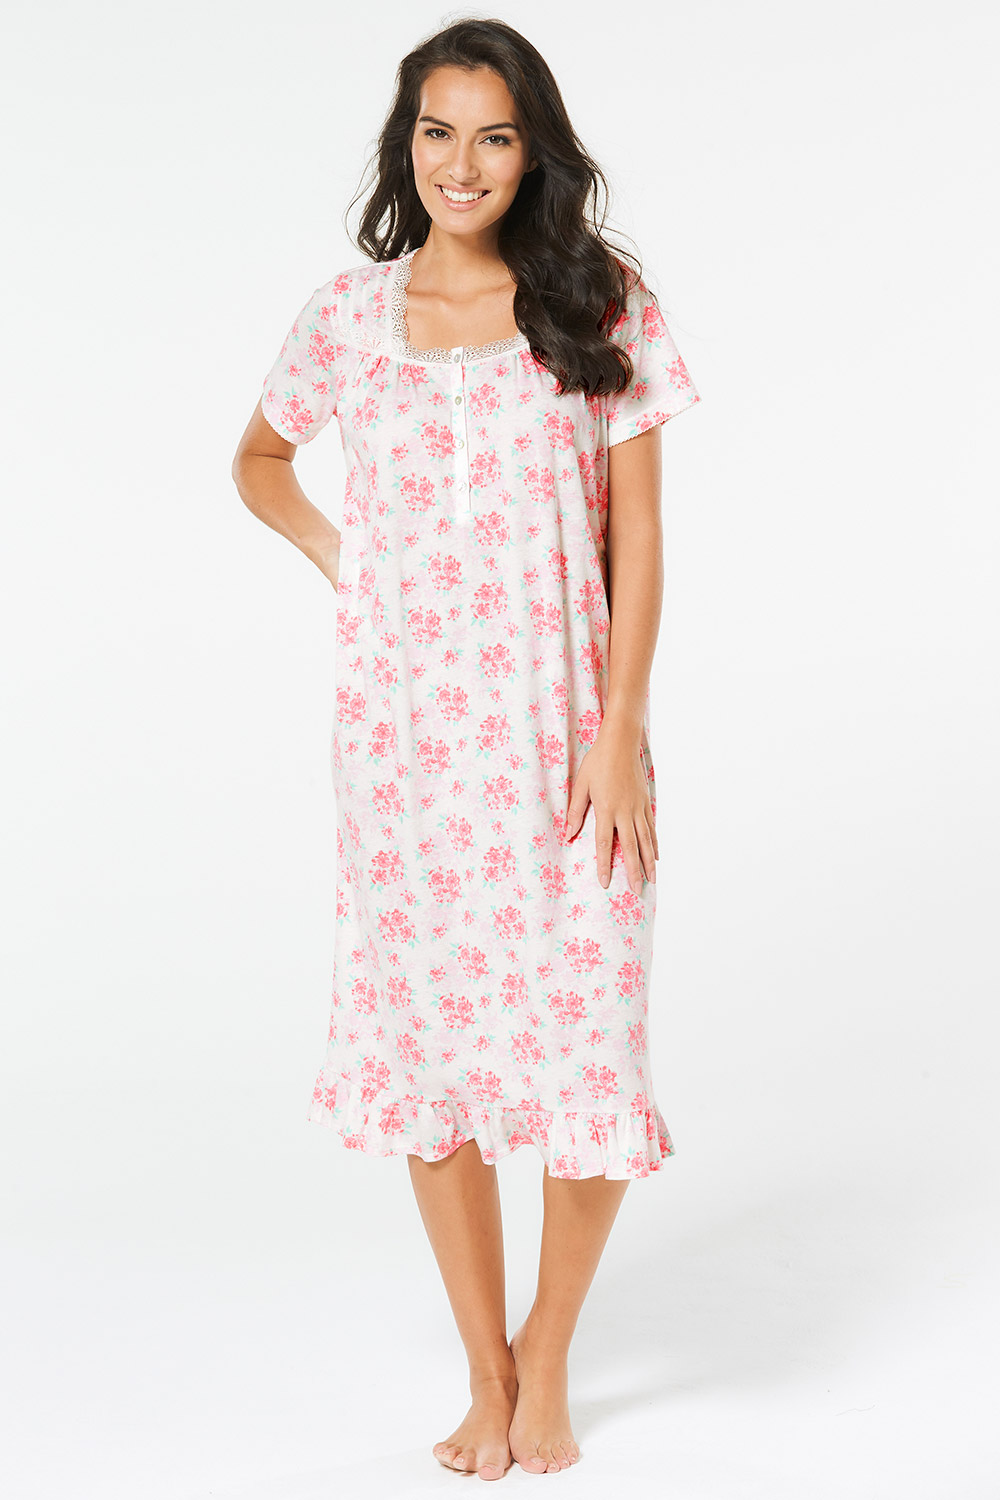 Buy Floral Frill Classic Nightdress | Home Delivery | Bonmarché